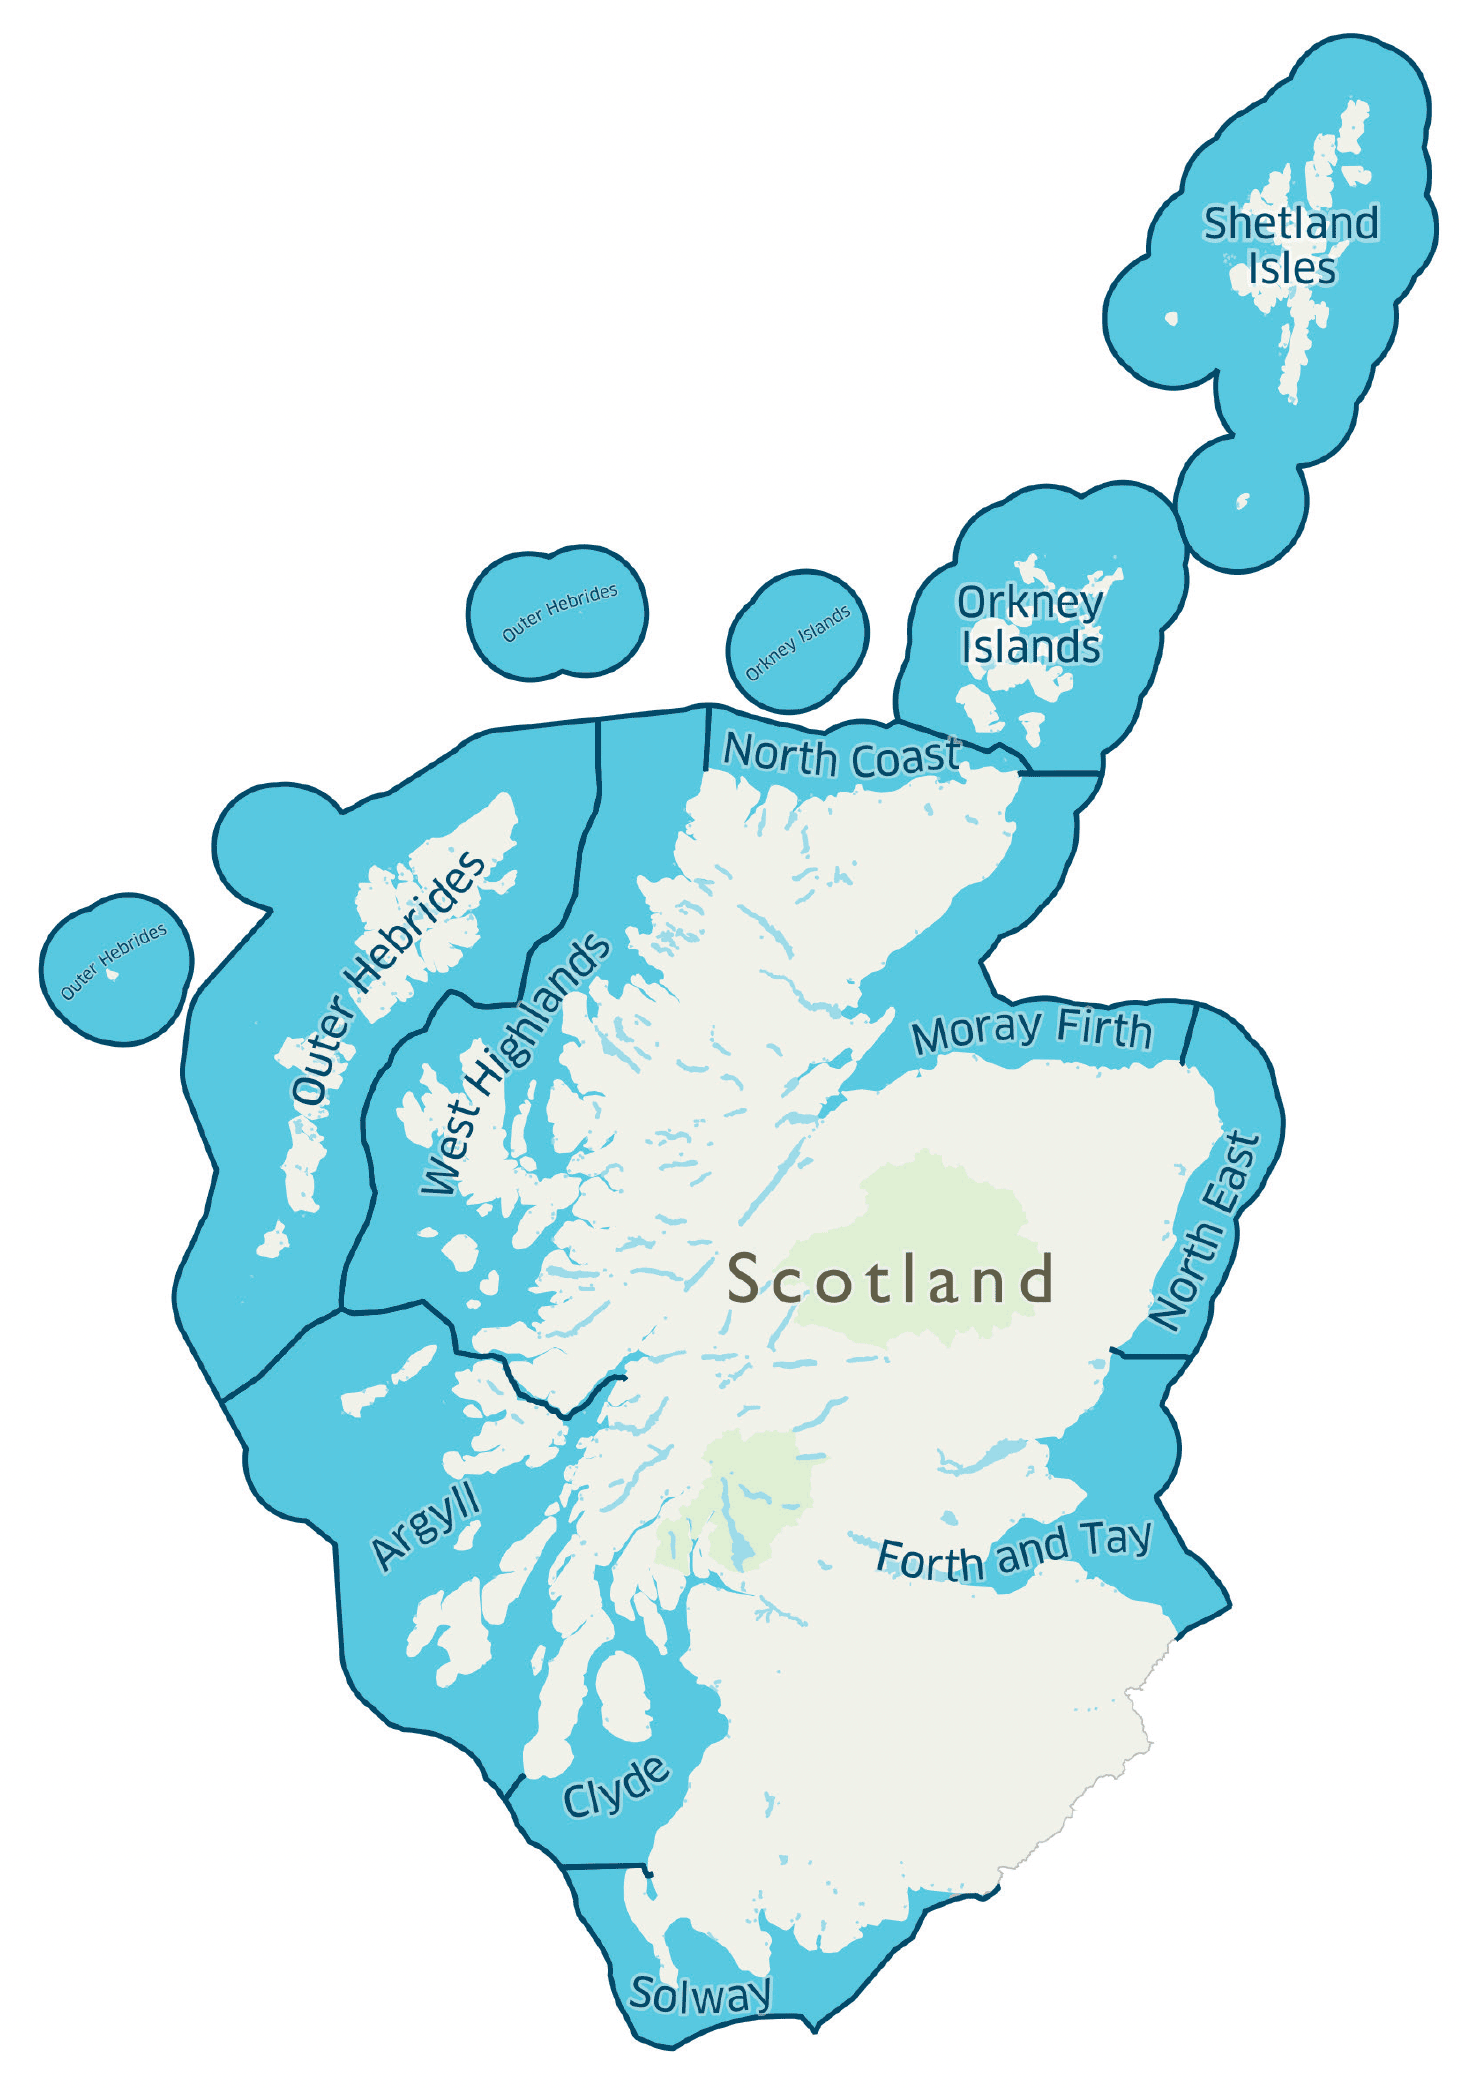 This is a map showing each of the Scottish Marine regions. The map is split into 11 areas around the coastline: Shetland isles, Orkney Isles, North Coast, Moray Firth, West Highlands, North East, Forth and Tay, Argyll, Clyde and Solway.